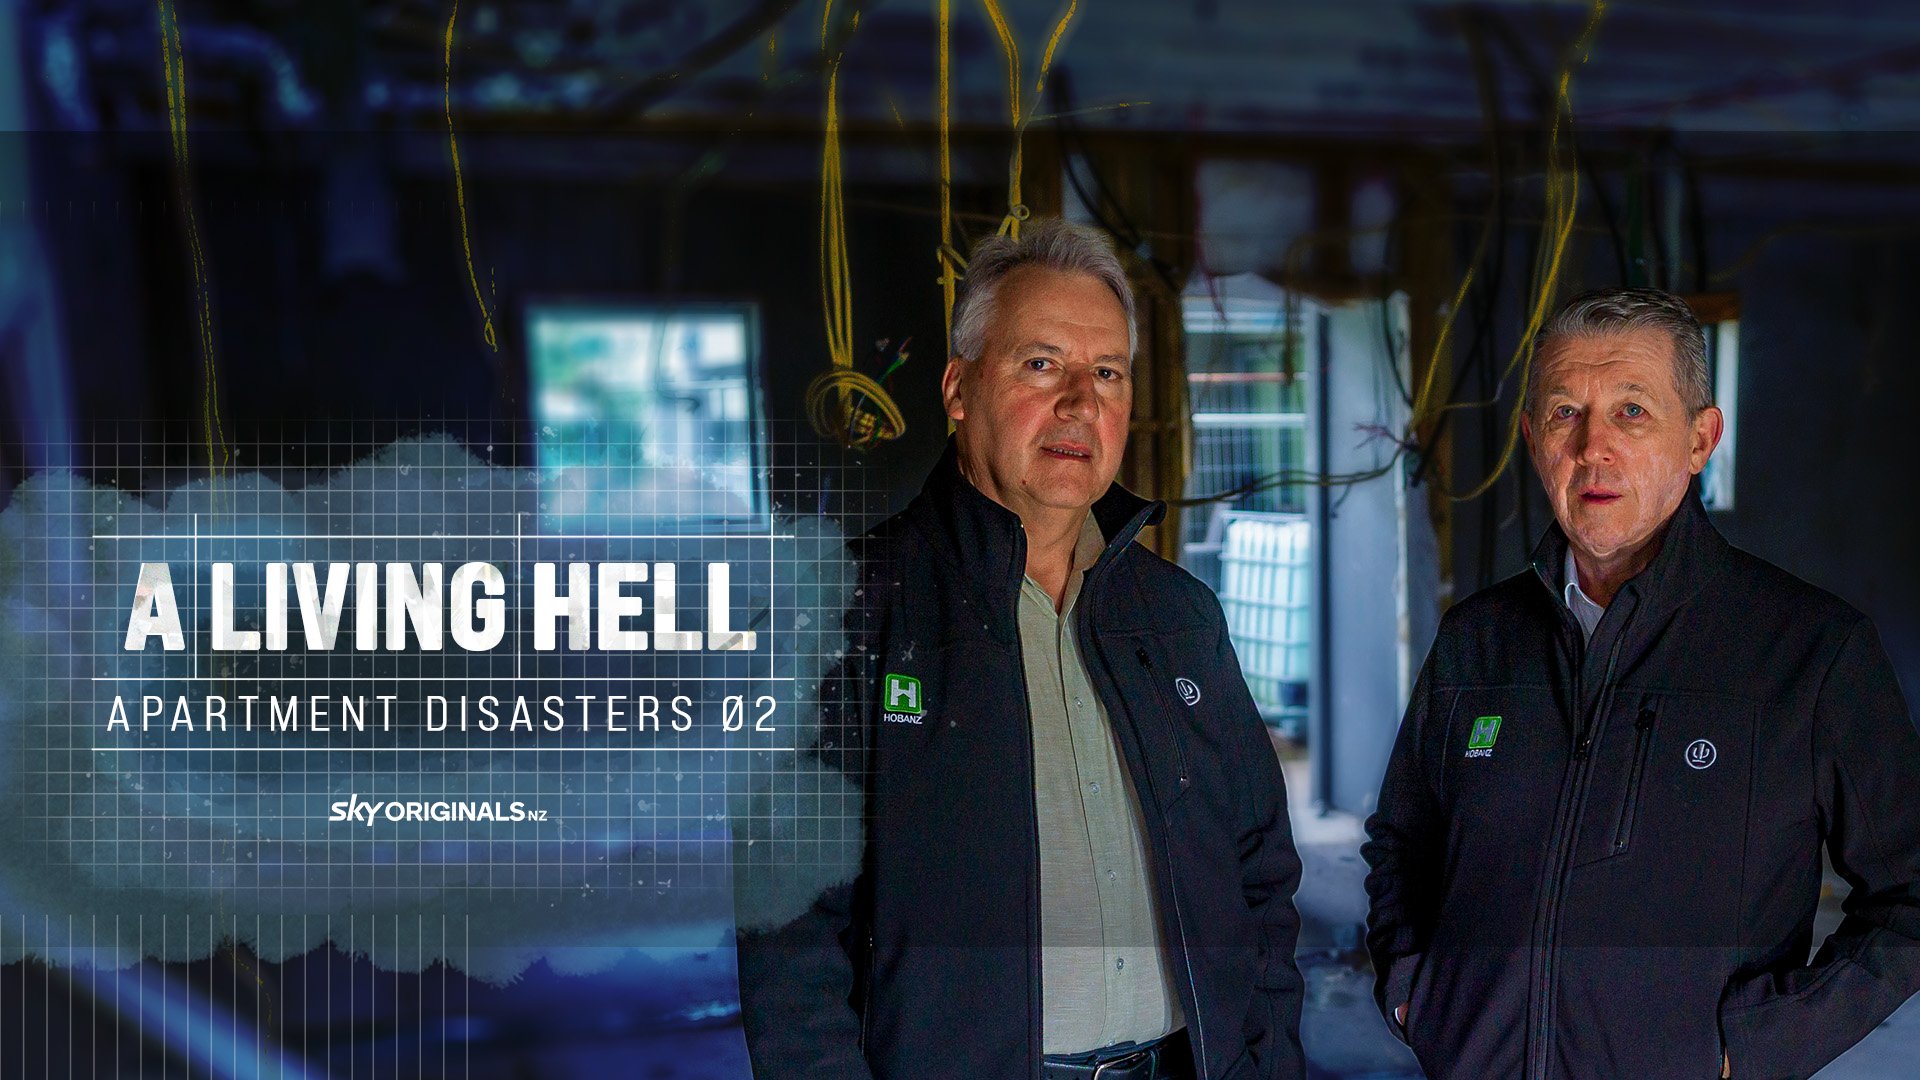 A Living Hell - Apartment Disasters S2 // NZ Publicity Campaign